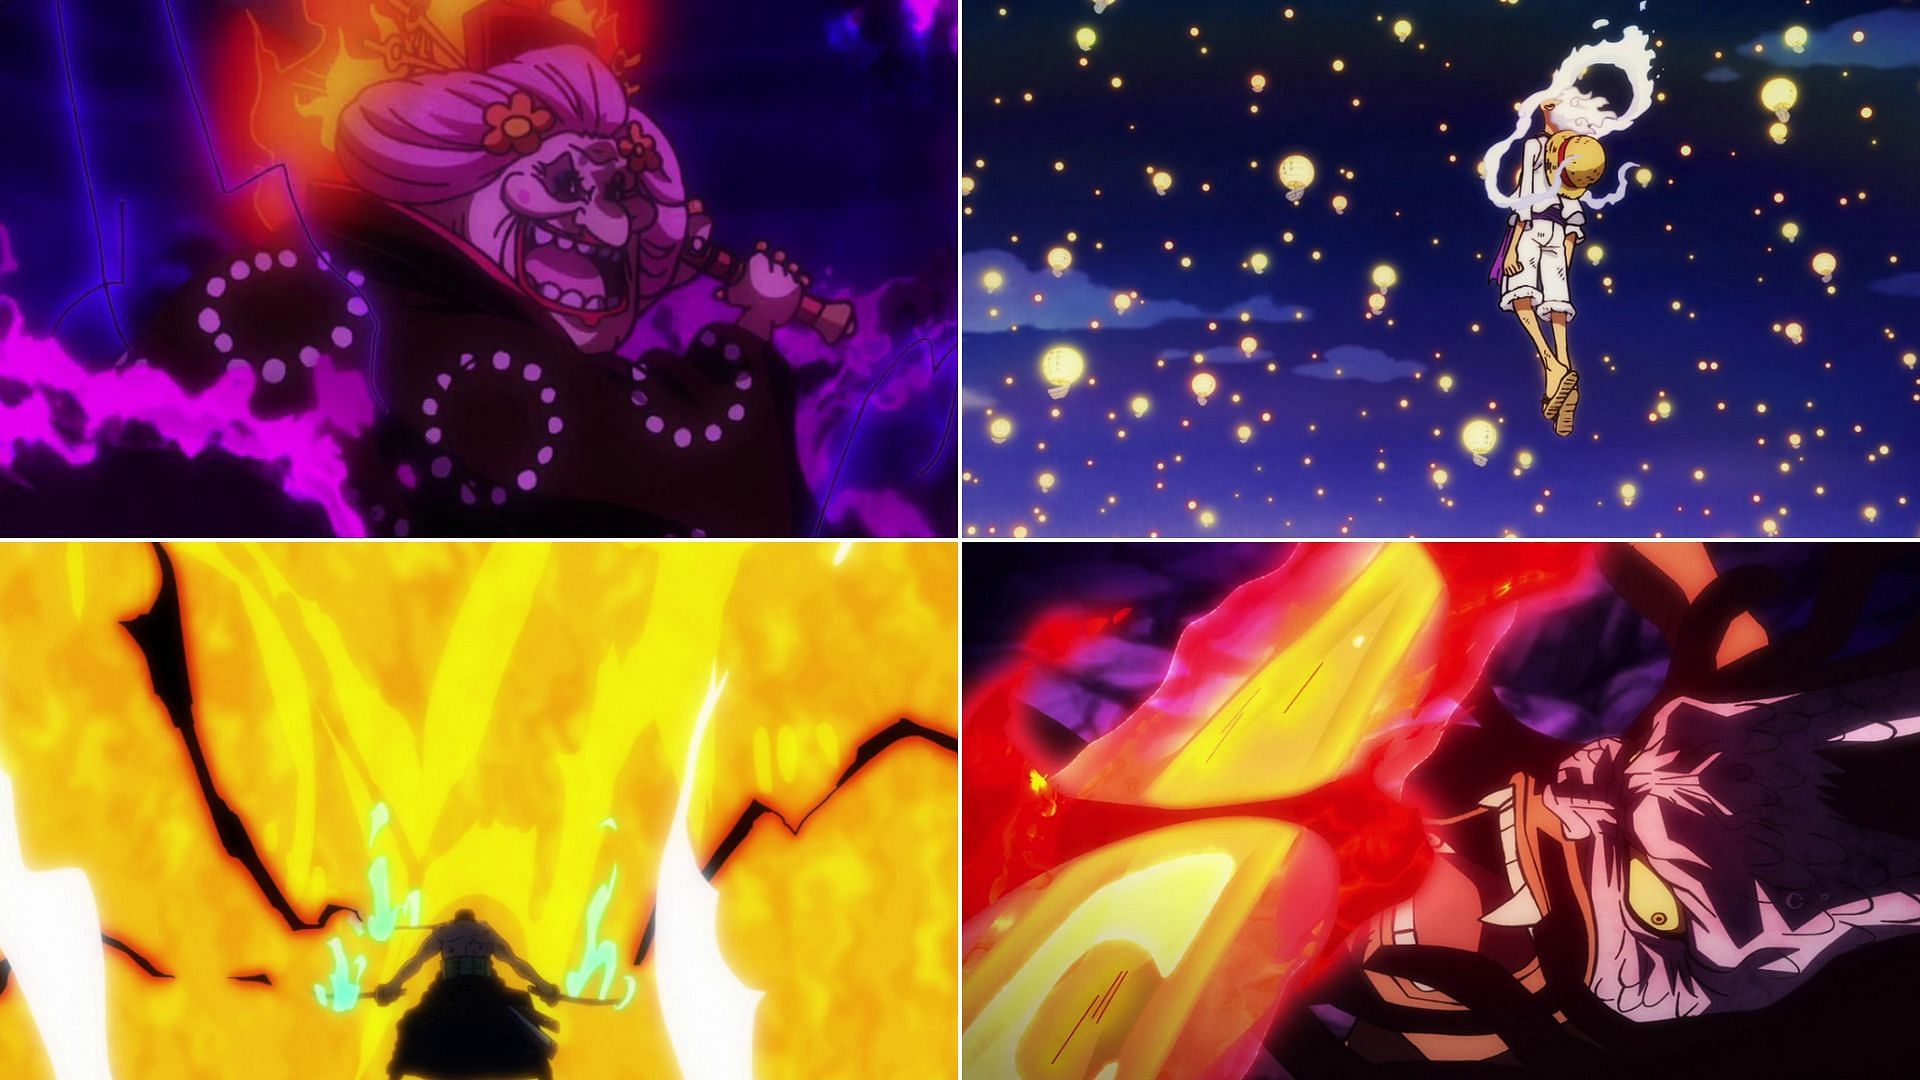 The fights featured in the Wano Arc were nothing short than amazing, and Toei Animation made them even better (Image via Toei Animation, One Piece)